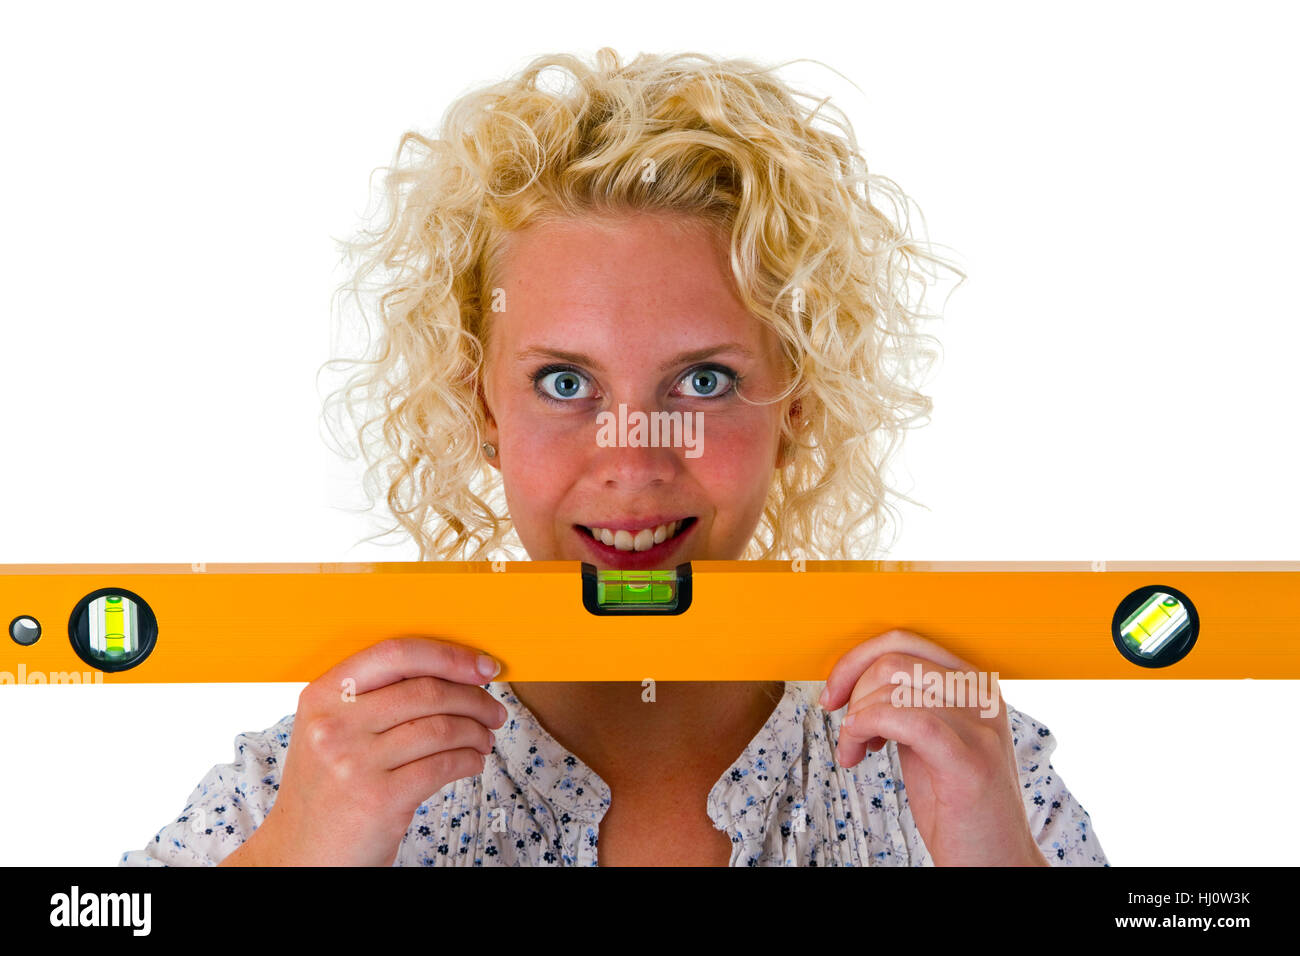 woman, check, laugh, laughs, laughing, twit, giggle, smile, smiling, laughter, Stock Photo